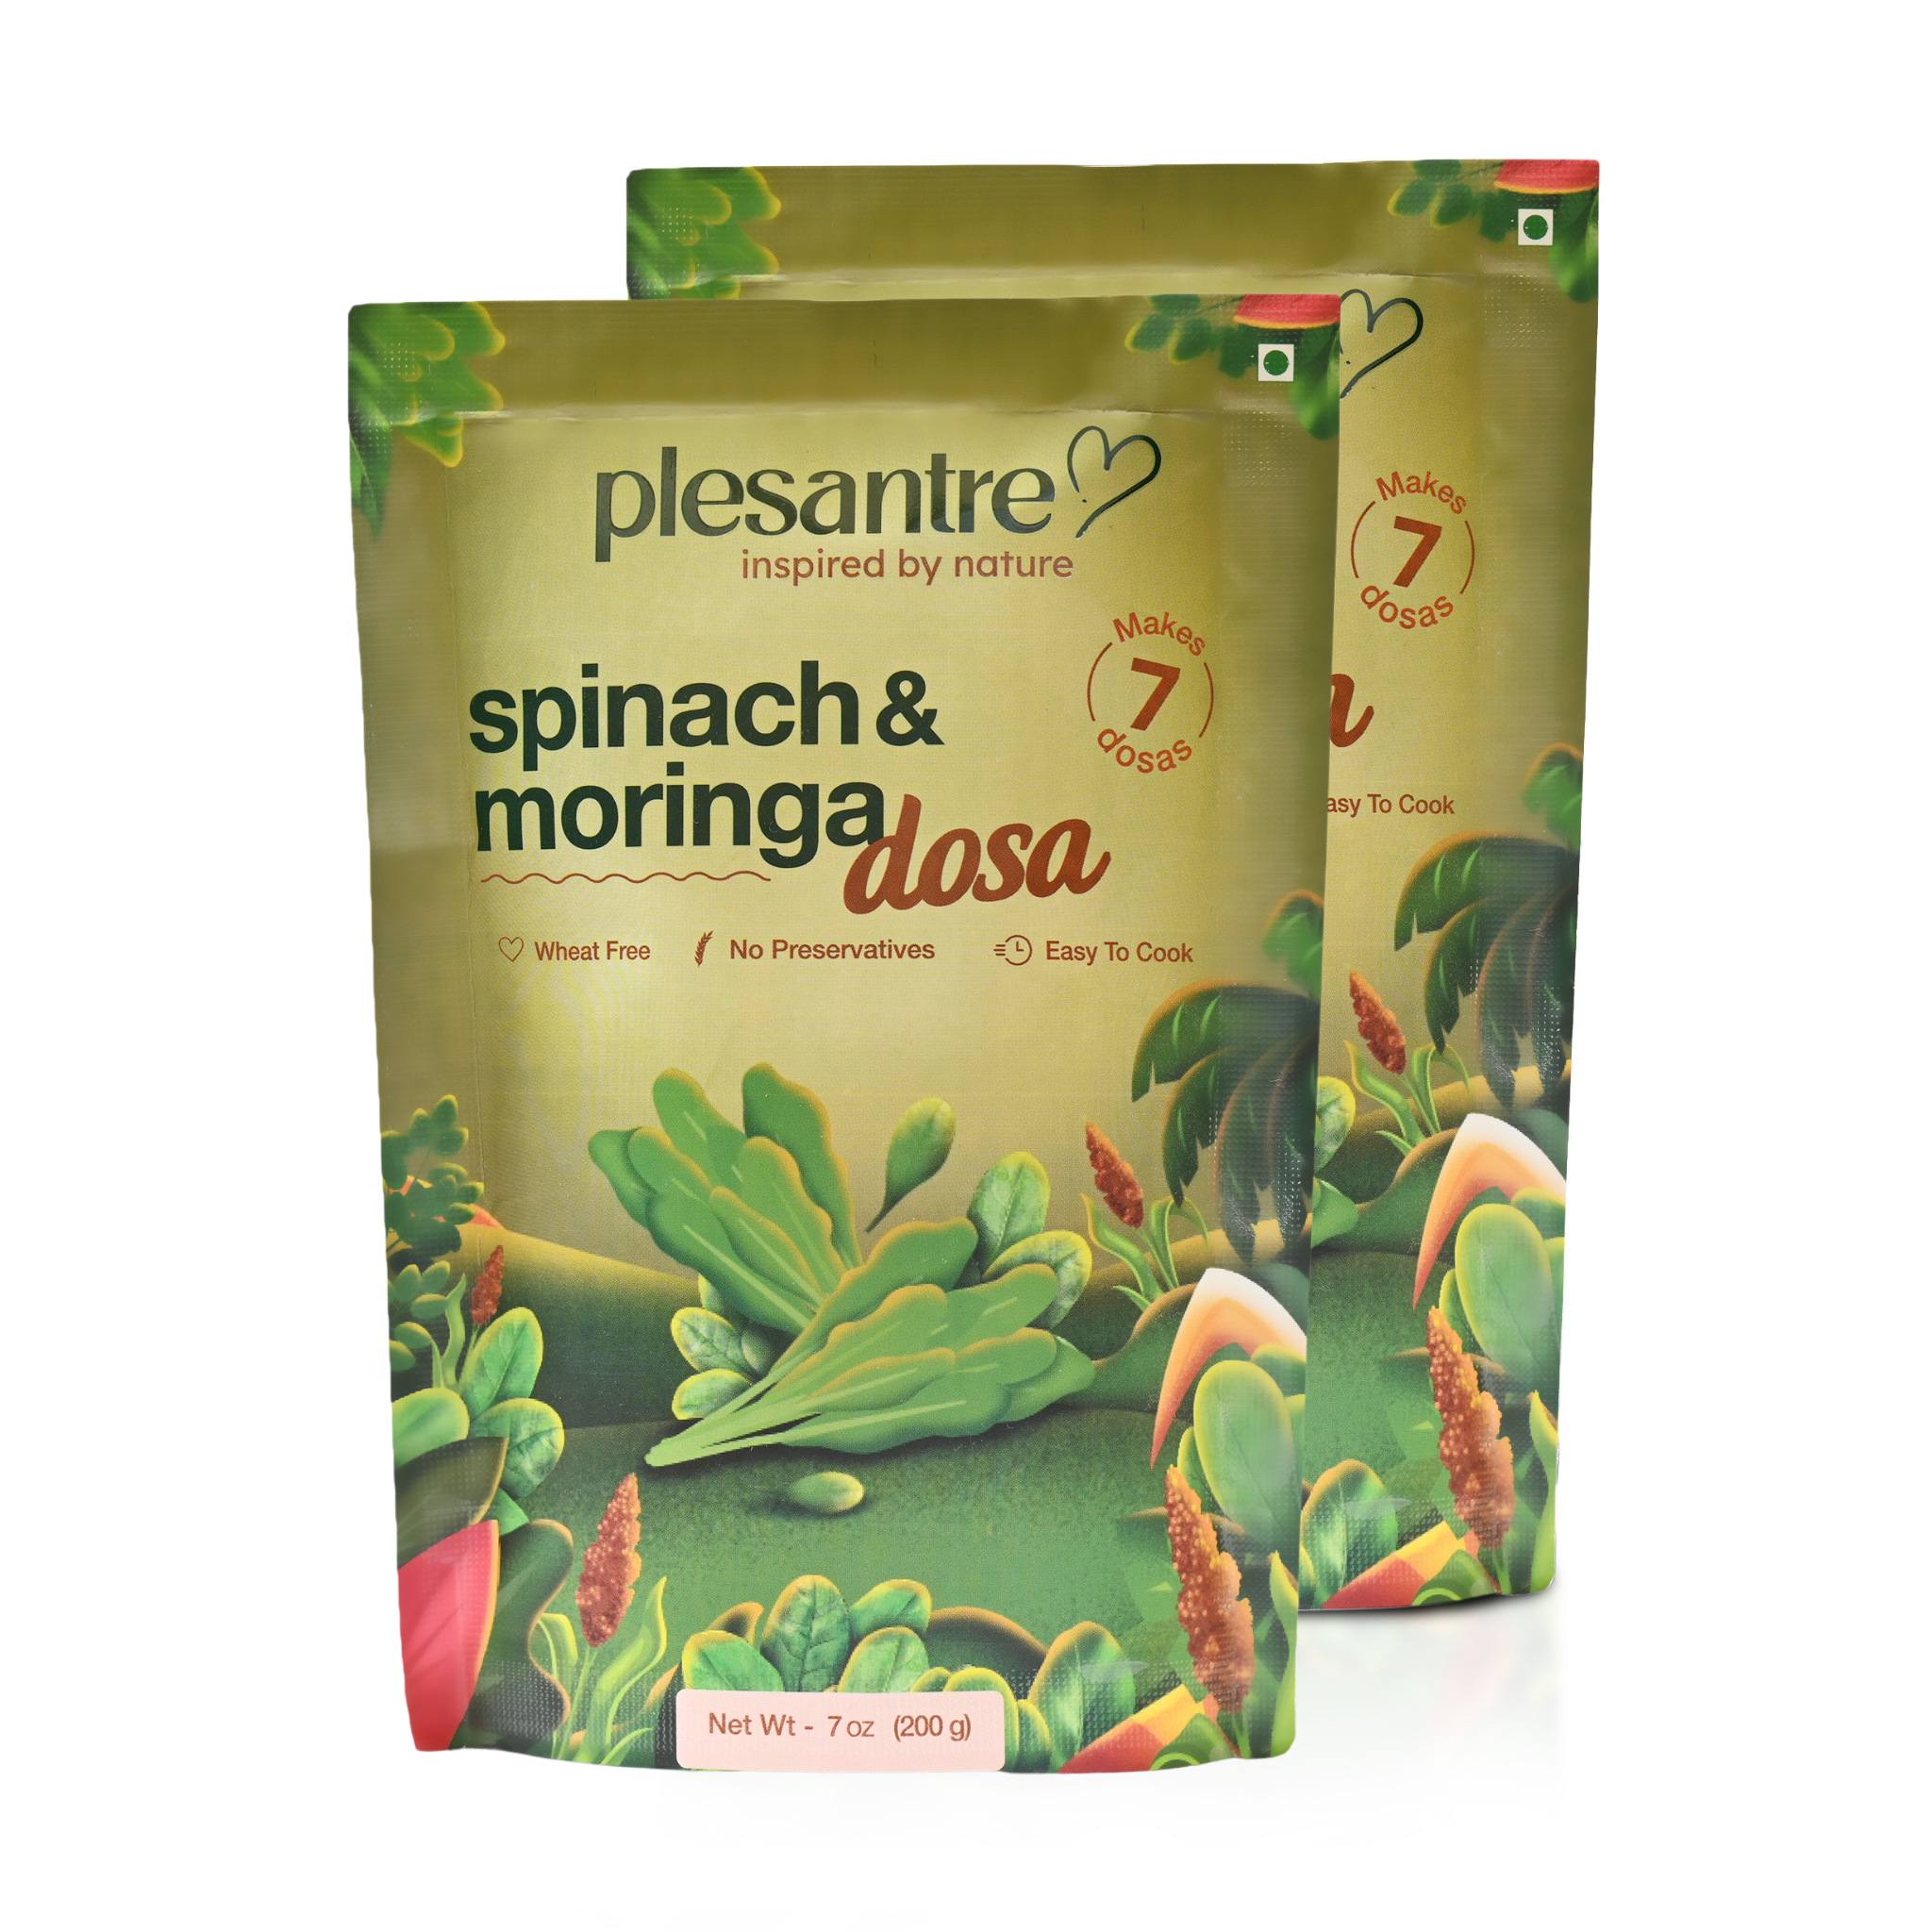 plesantre "Spinach & Moringa Dosa" Healthy Greens Superfood Dosa Batter Mix - Instant Ready to Cook Breakfast Premix - Wheat Free, Vegan, No Preservatives - 200g x Pack of 2, Makes 14 Dosas